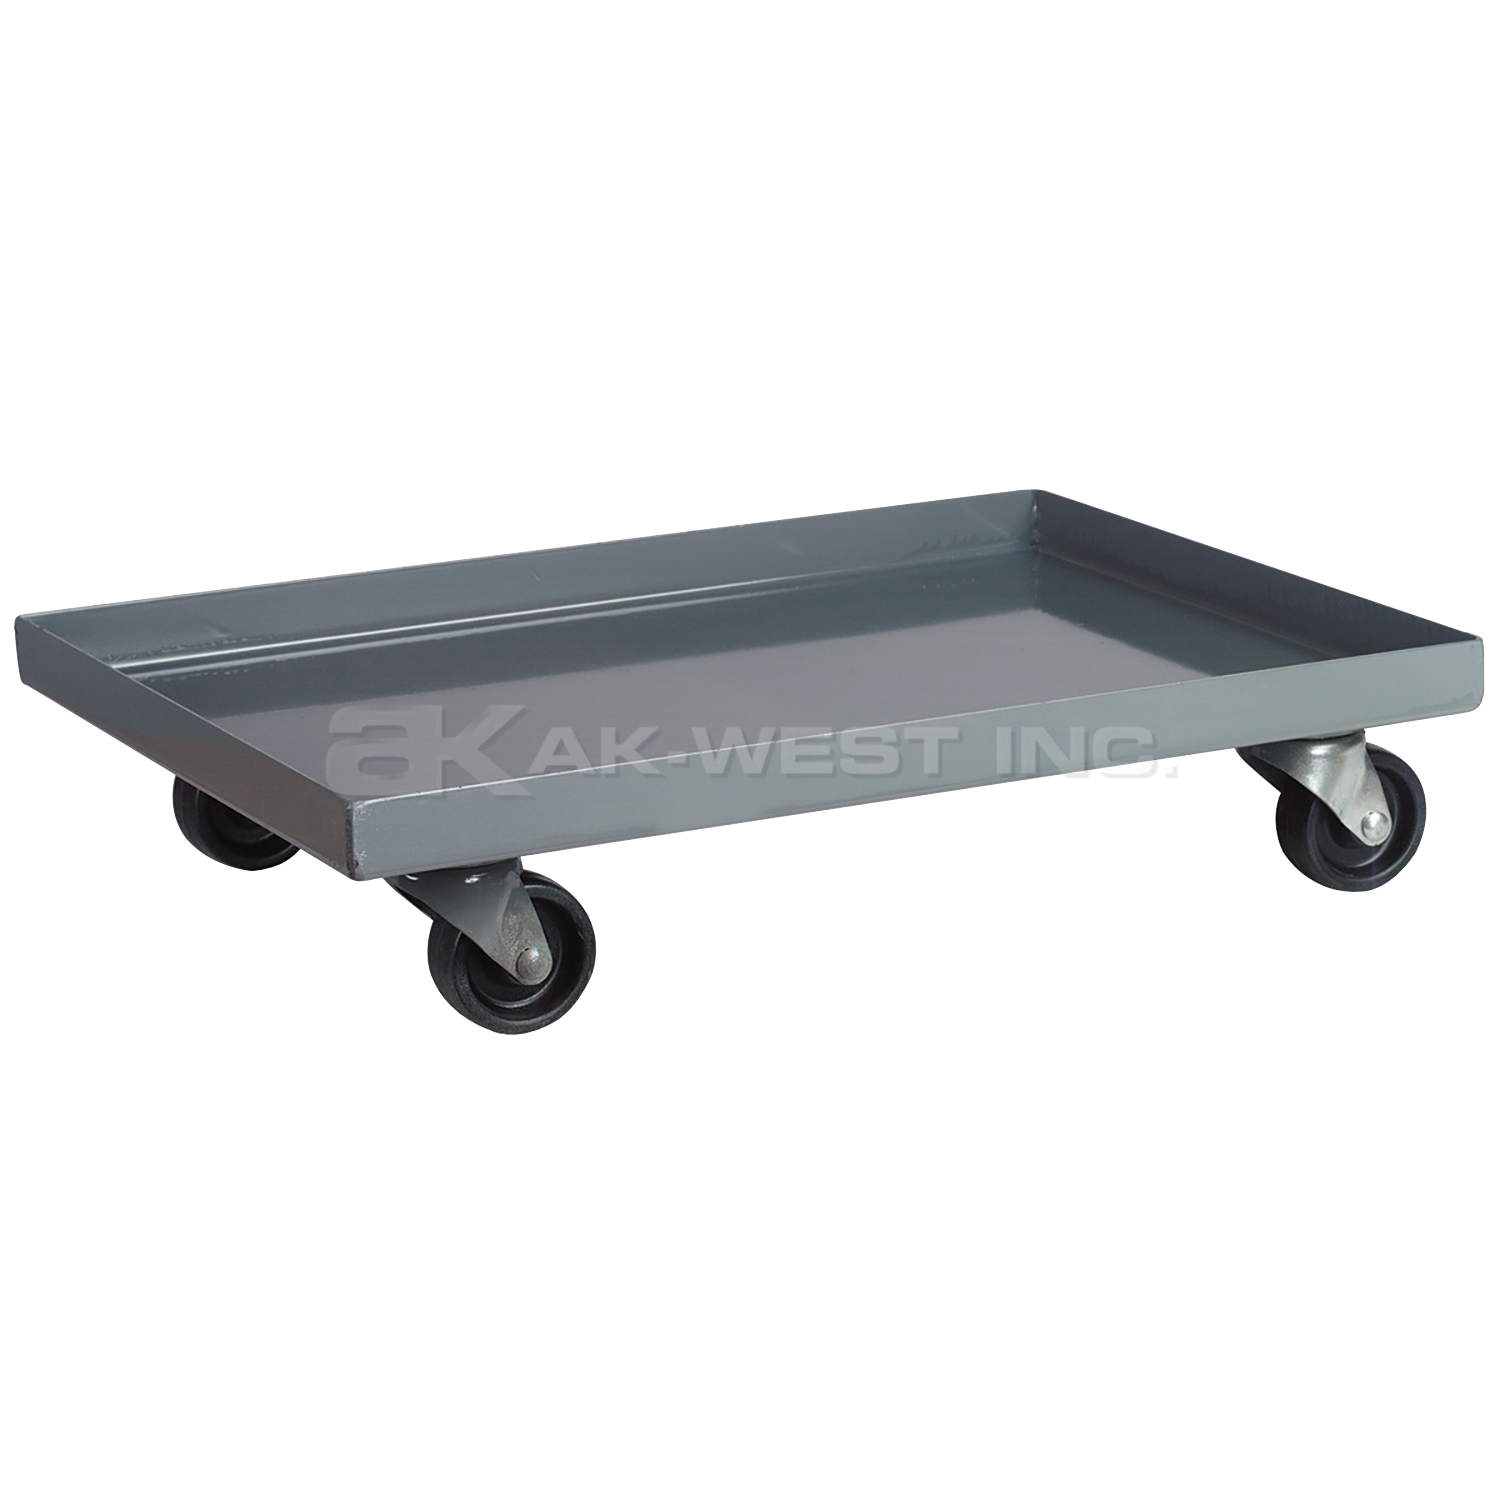 Grey, 36" x 18" Dolly for Steel Cabinets